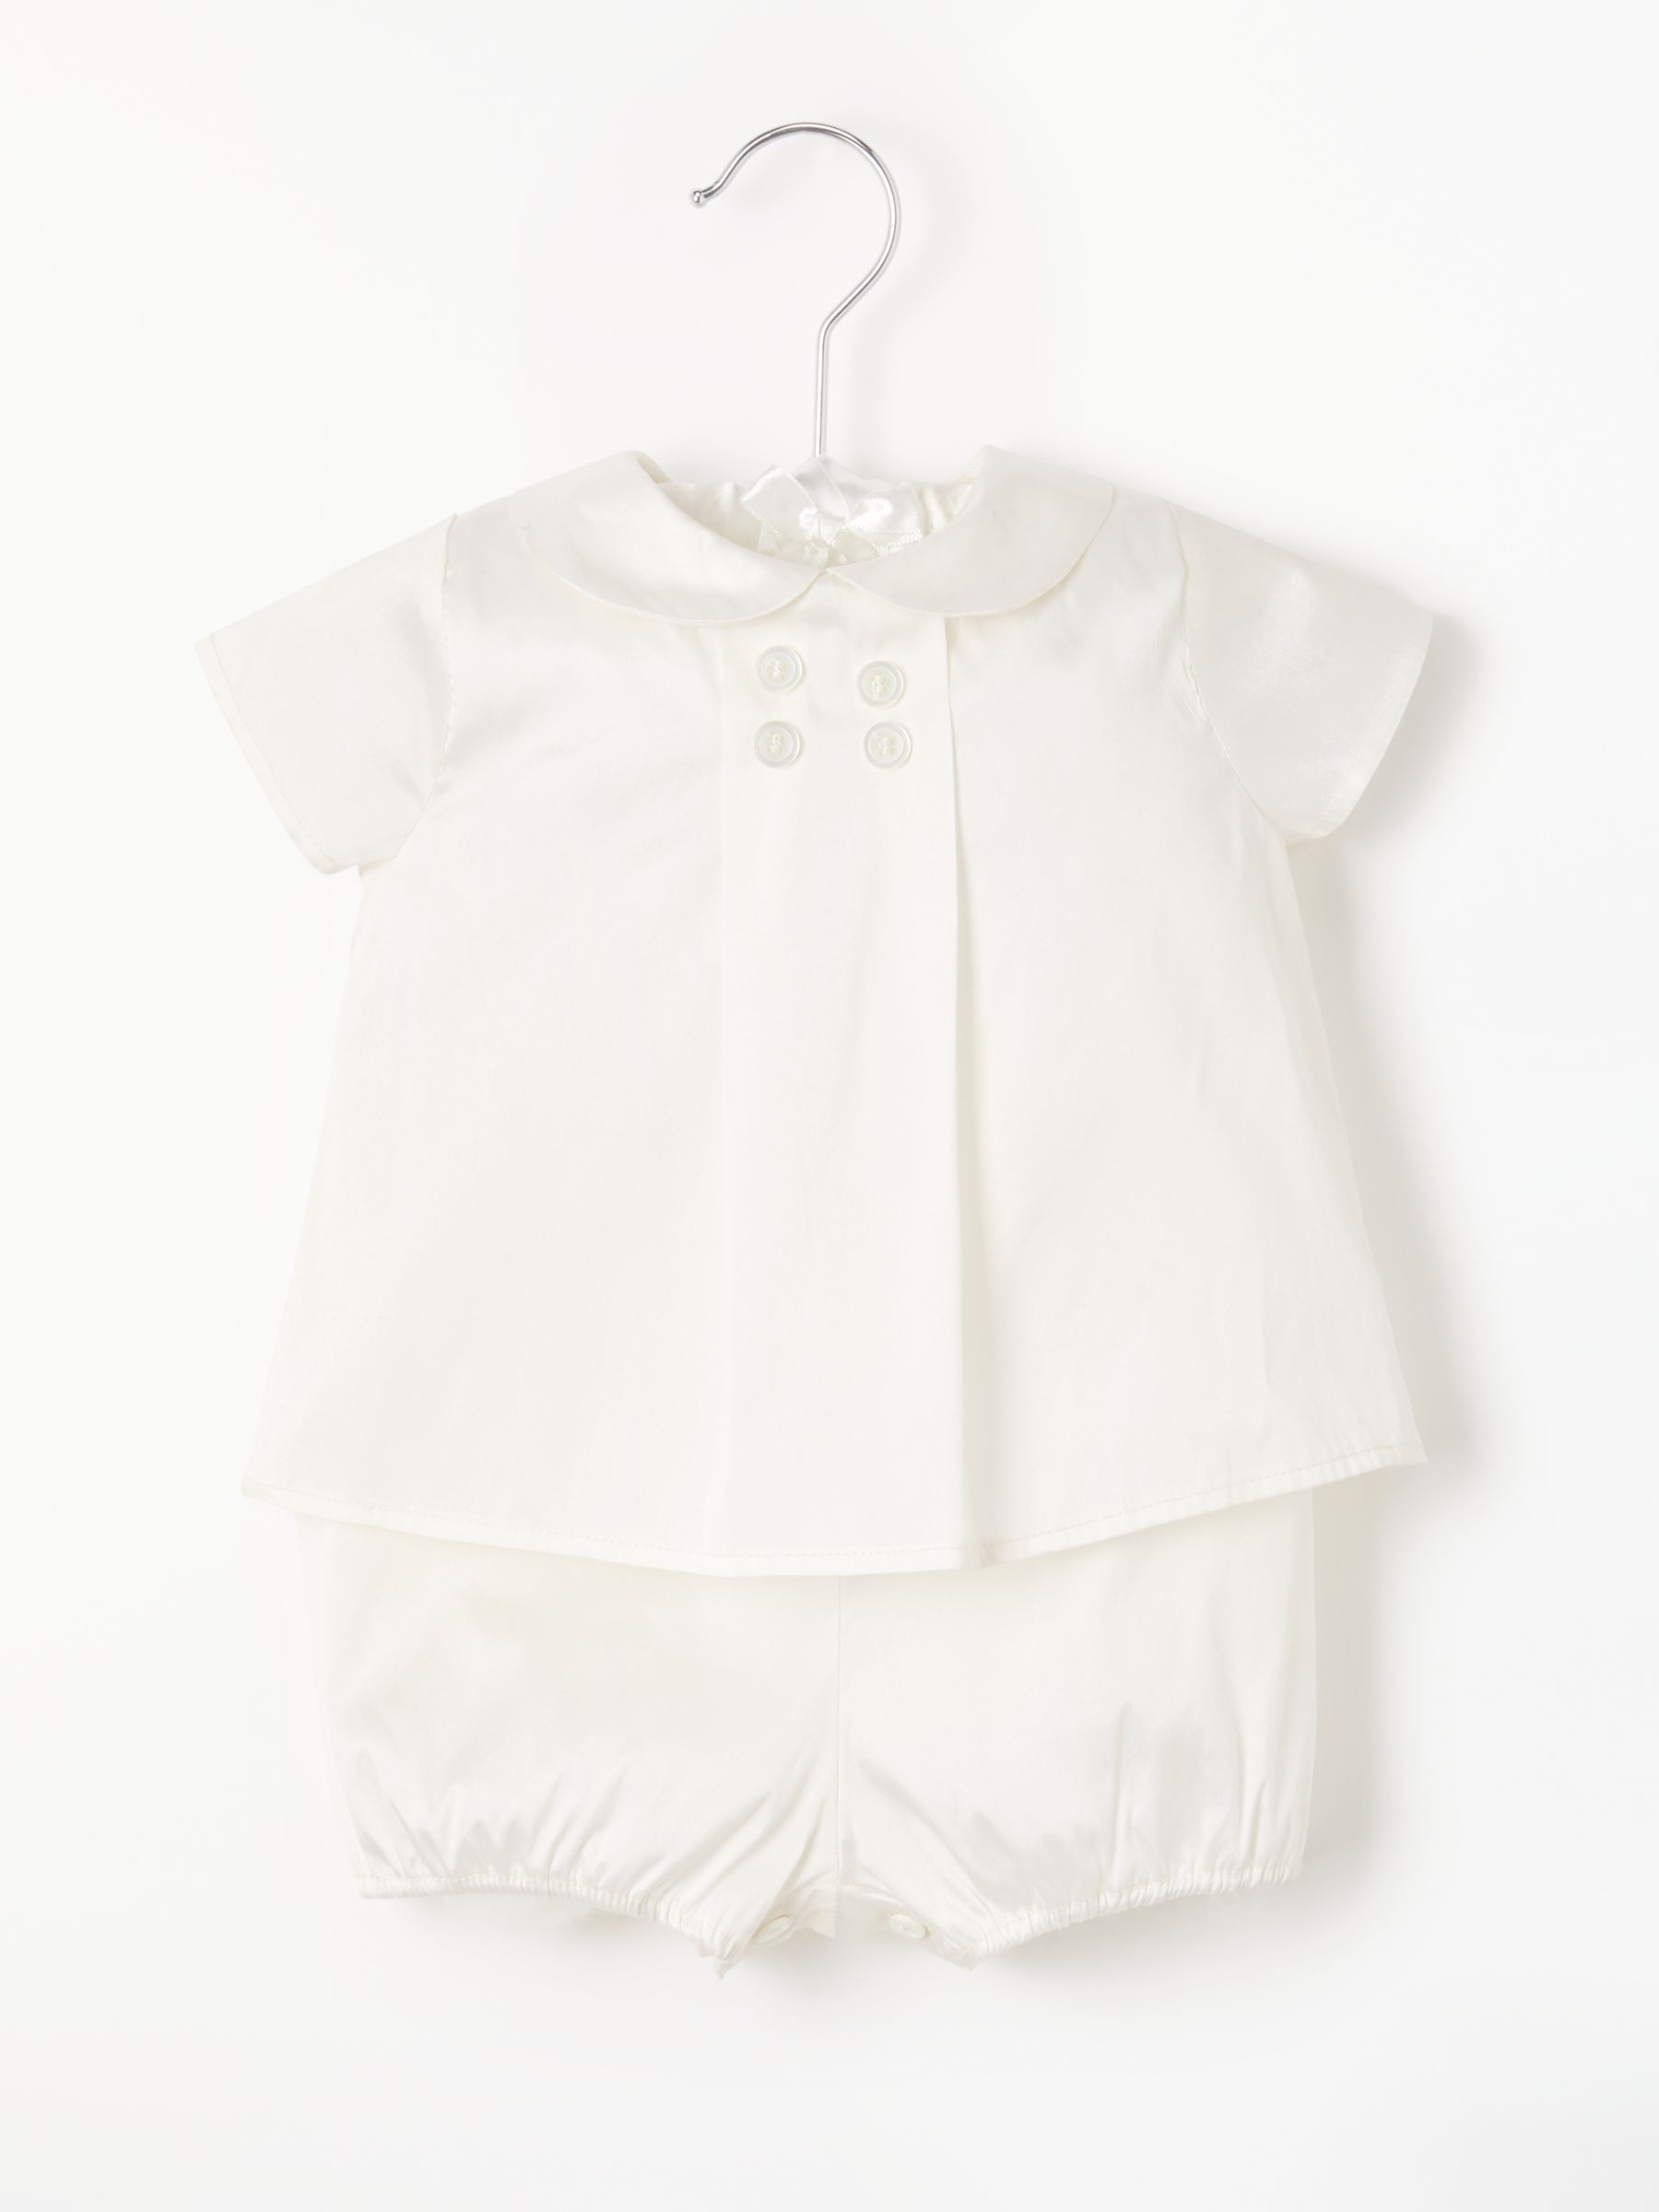 2 year old christening outfit